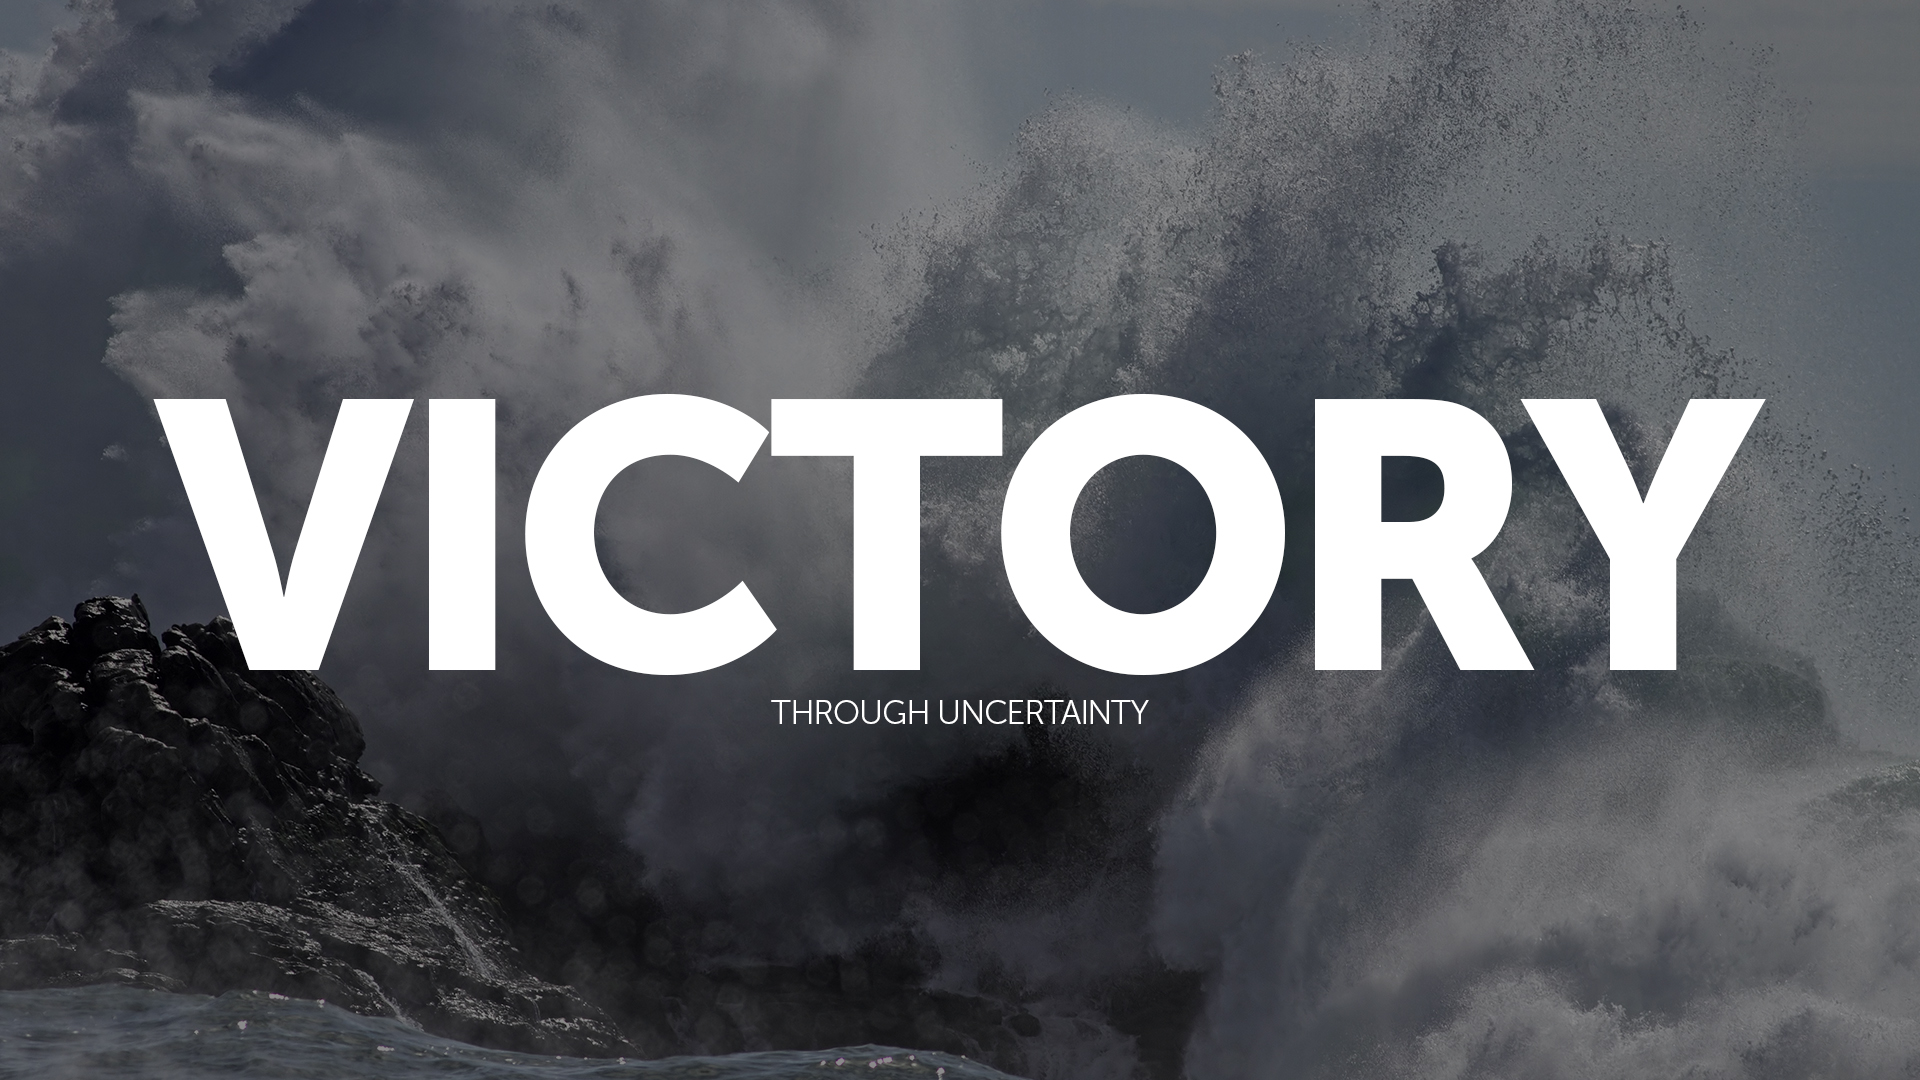 Victory Through Uncertainty Title Image